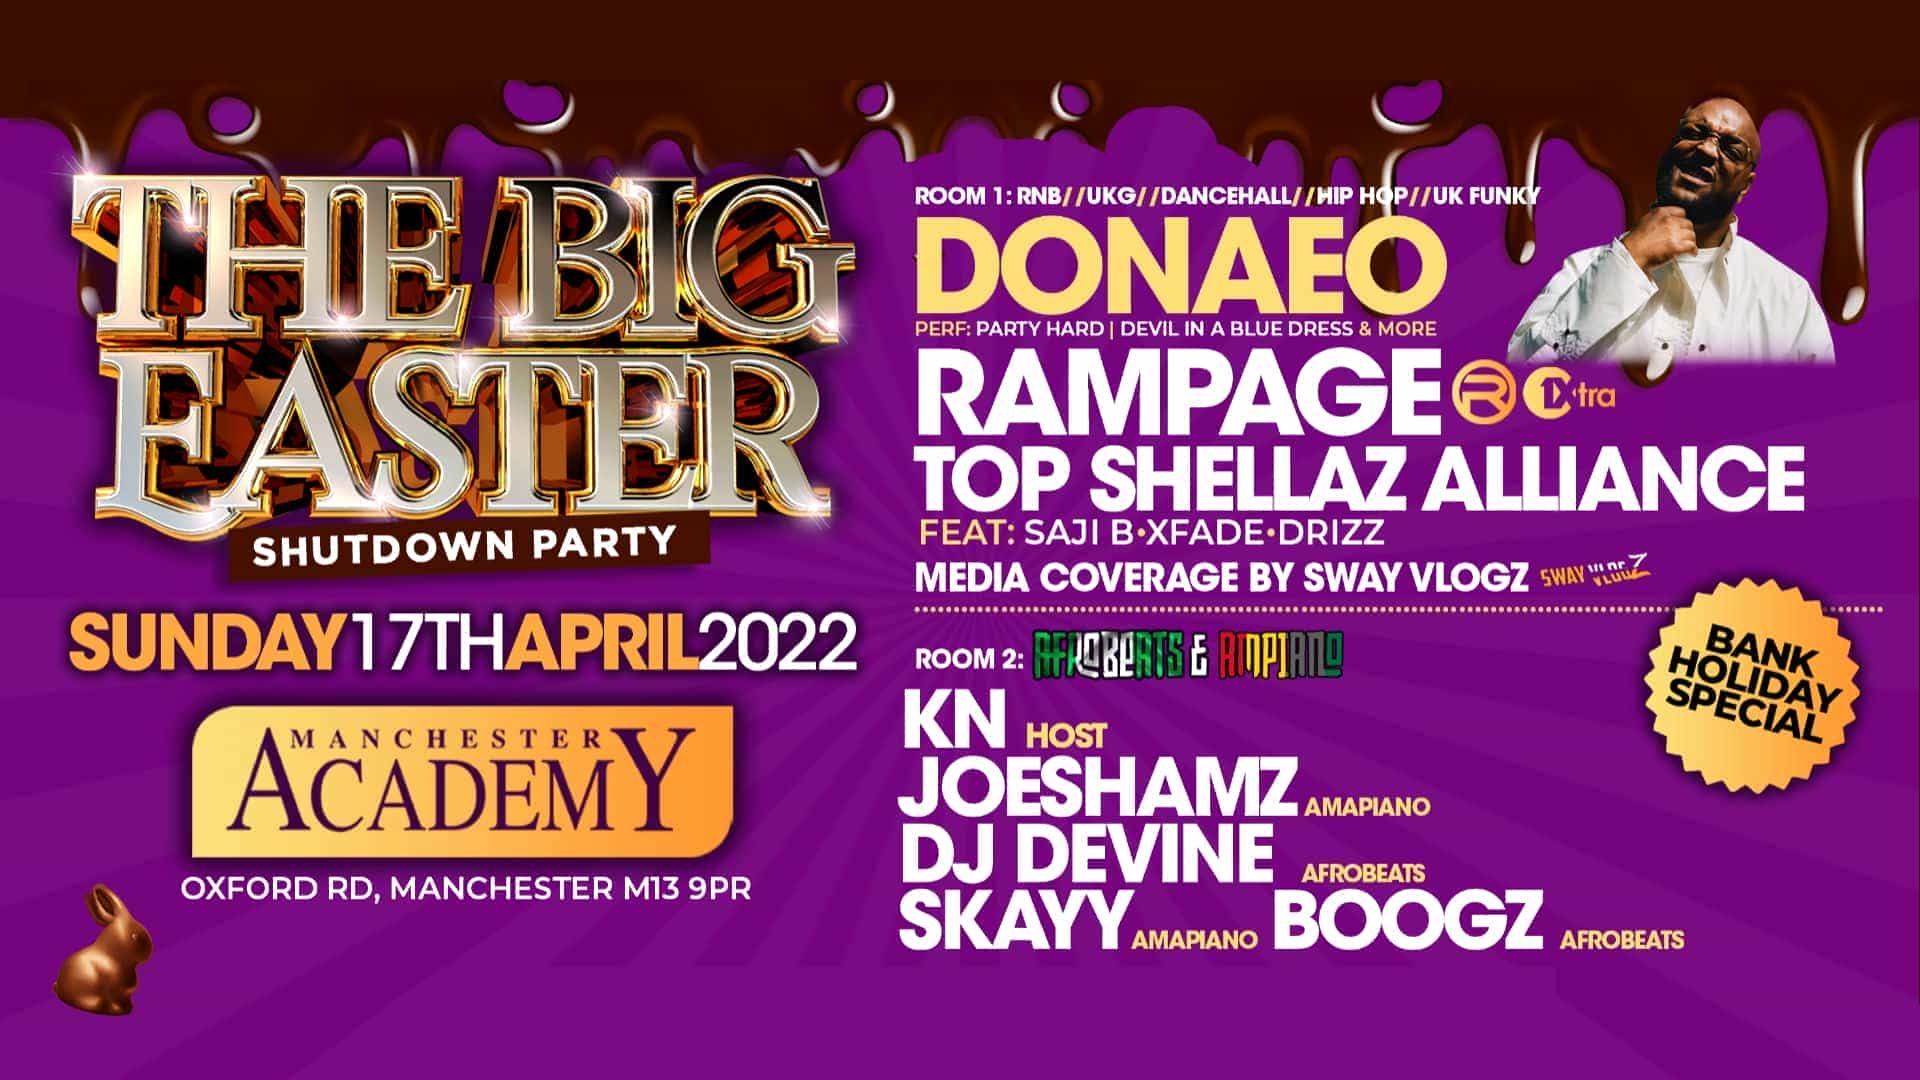 The Big Easter Shutdown Party featuring Donaeo